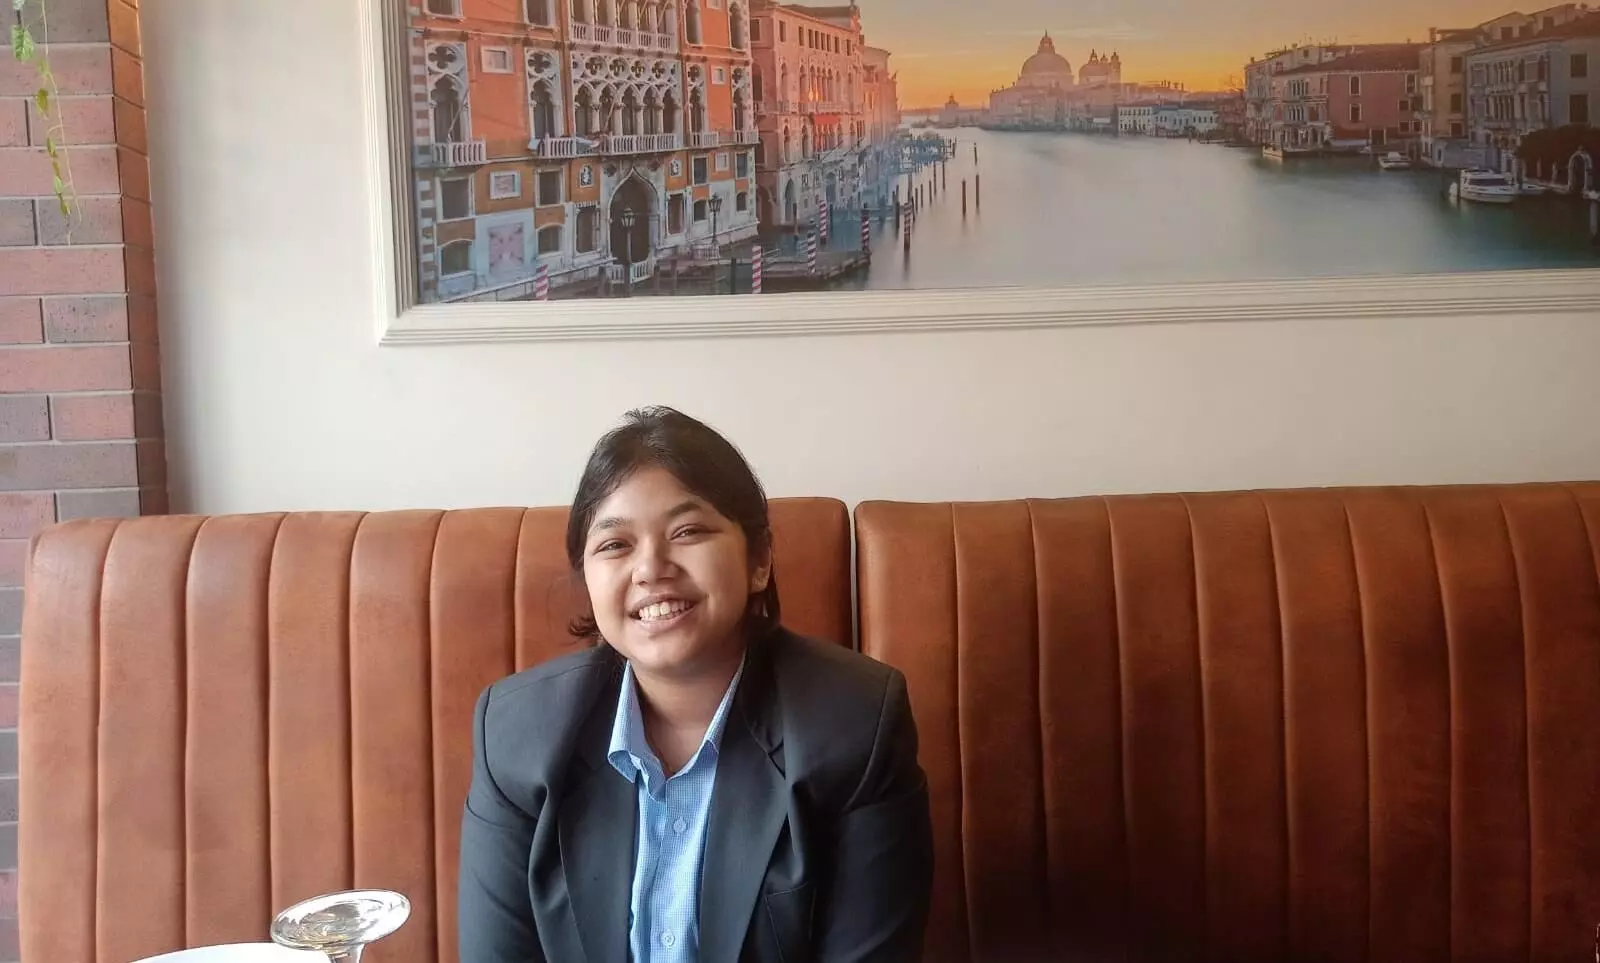 Guwahati girl secures place at Balliol College of Oxford University to study  Sanskrit